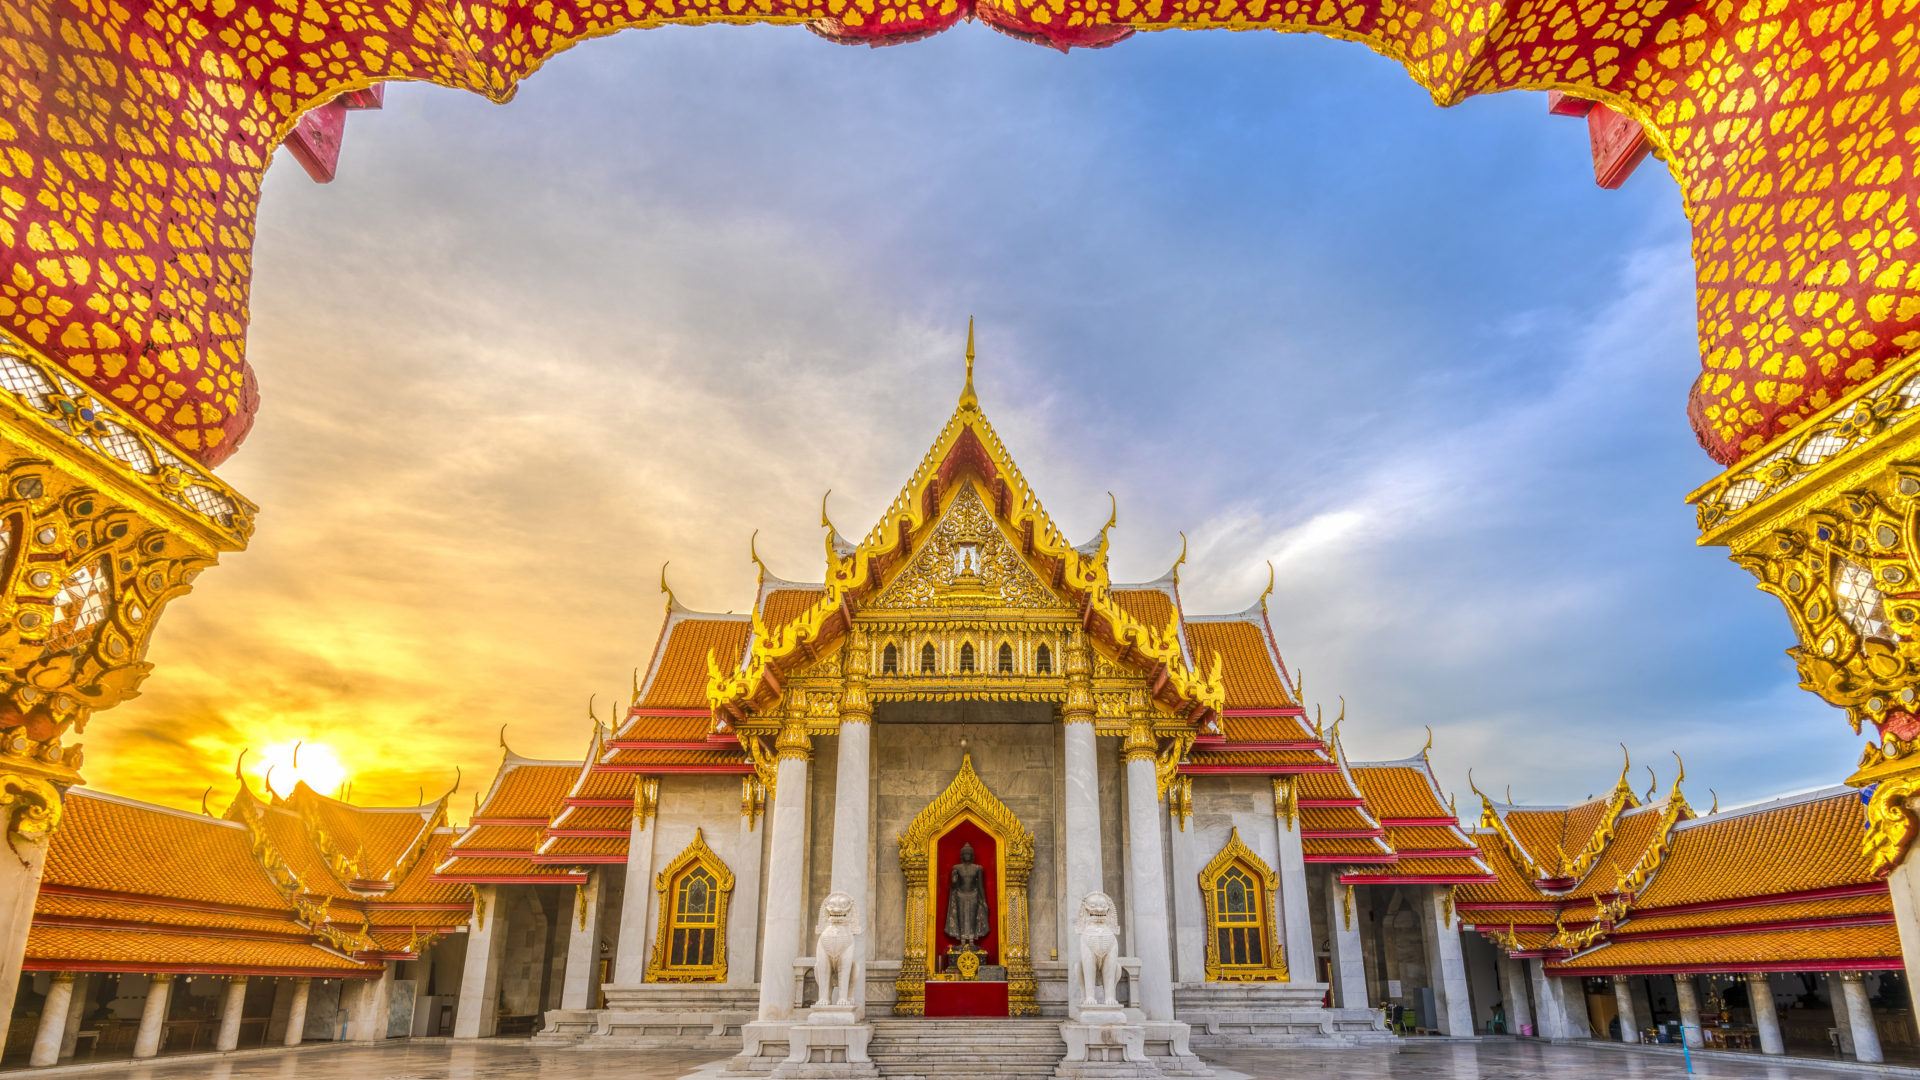 The Marble Temple Of Wat Benchamabhopit Buddhist Temple In Bangkok Thailand Android Wallpaper For Your Desktop Or Phone 5200x3250, Wallpaper13.com